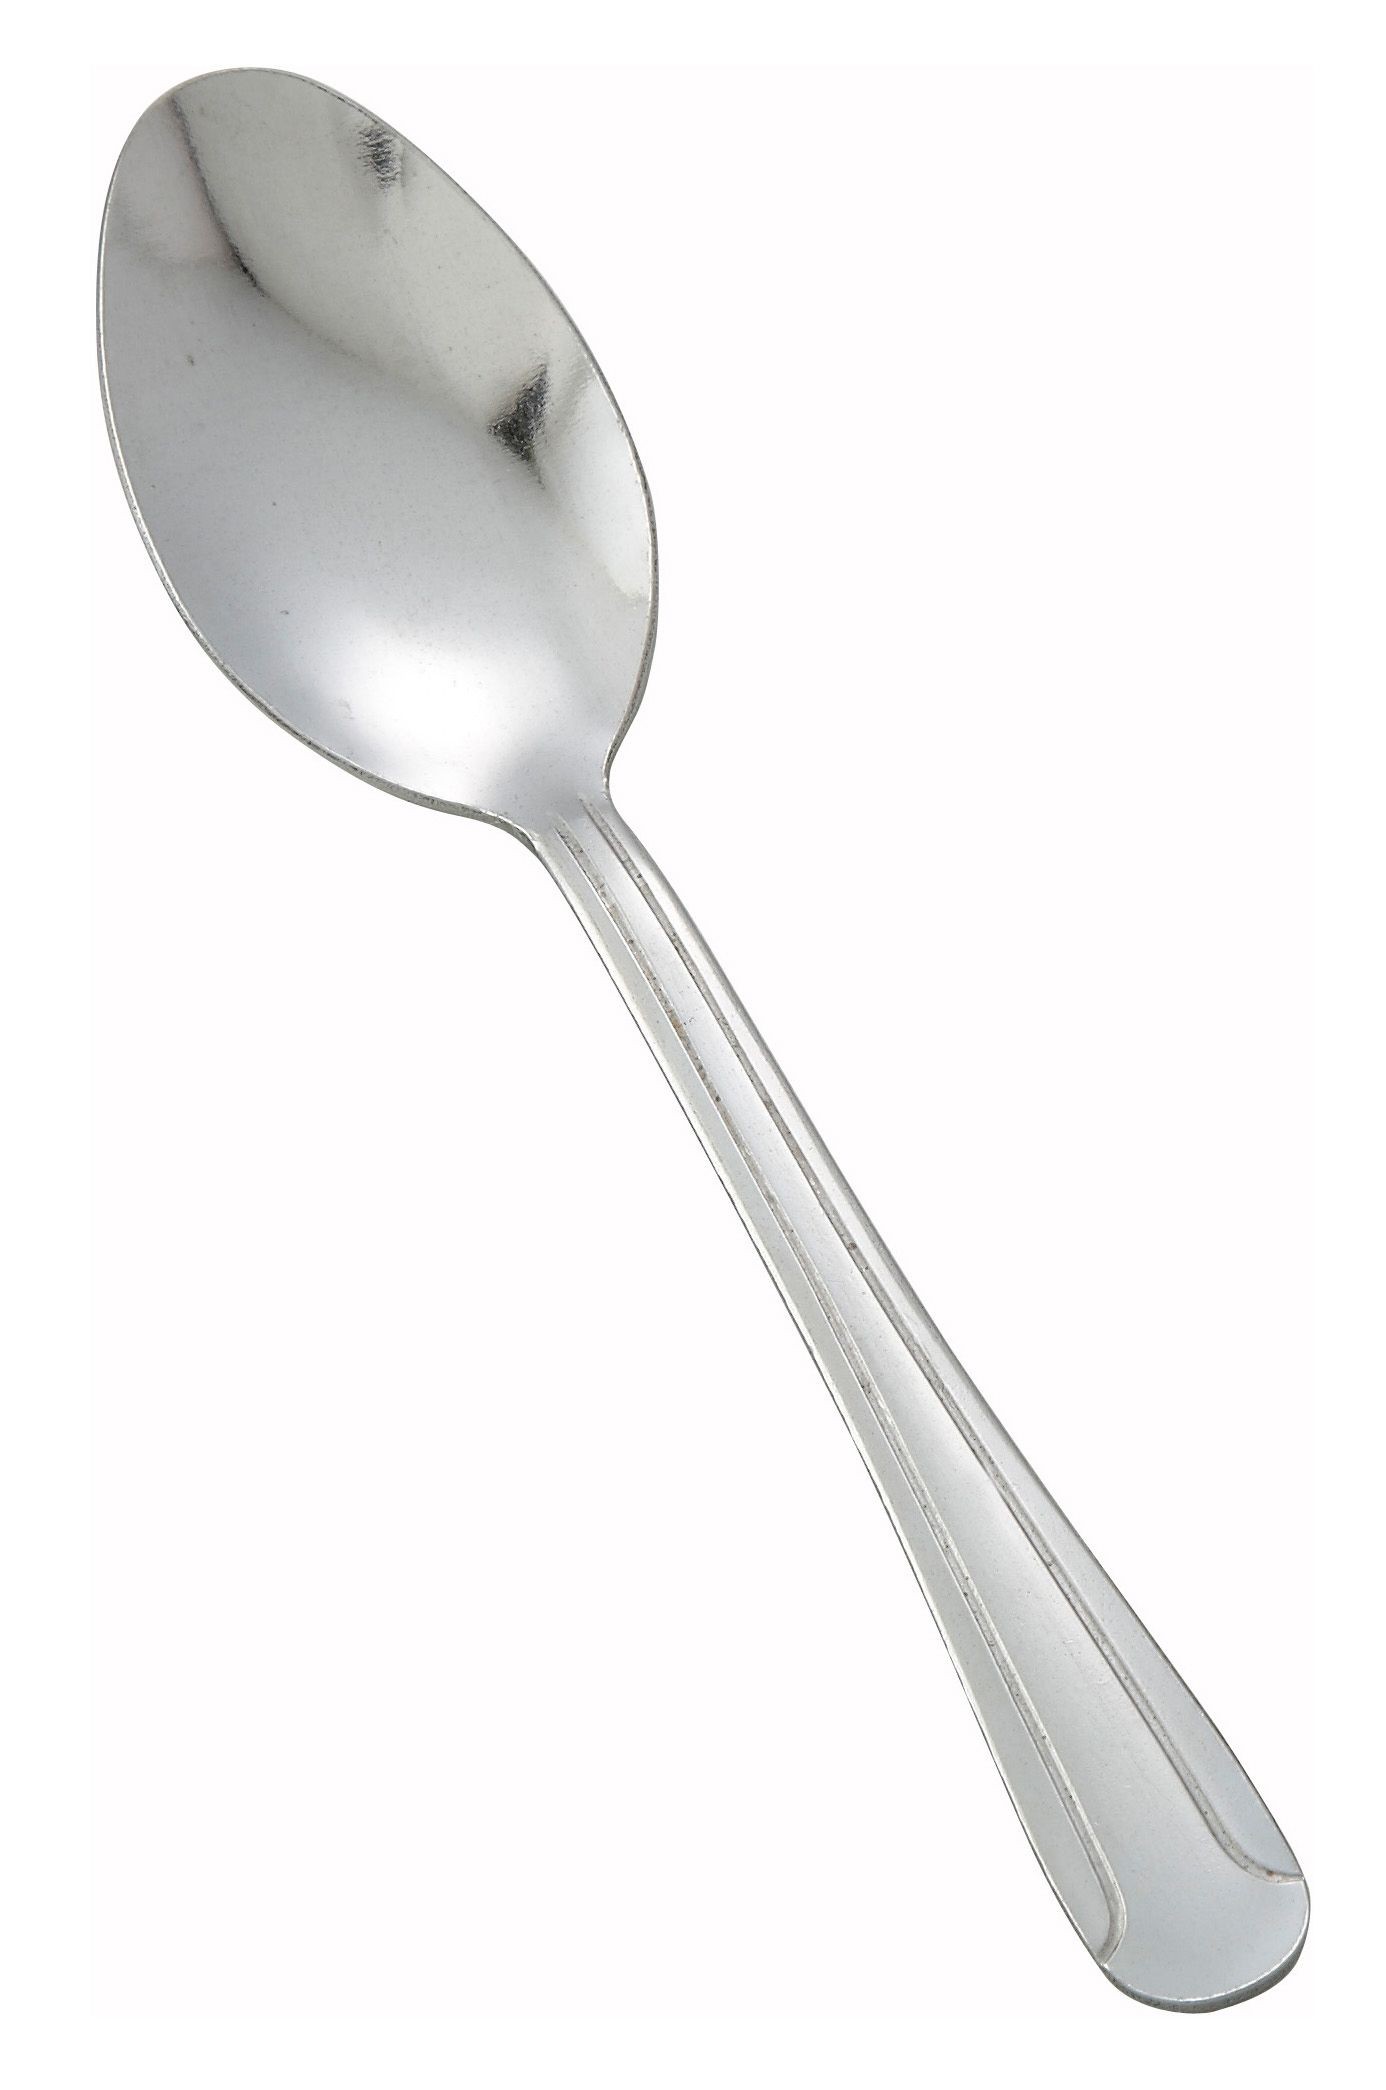 Winco 0014-01 Dominion Heavy Weight 18/0 Stainless Steel Teaspoon (12/Pack)